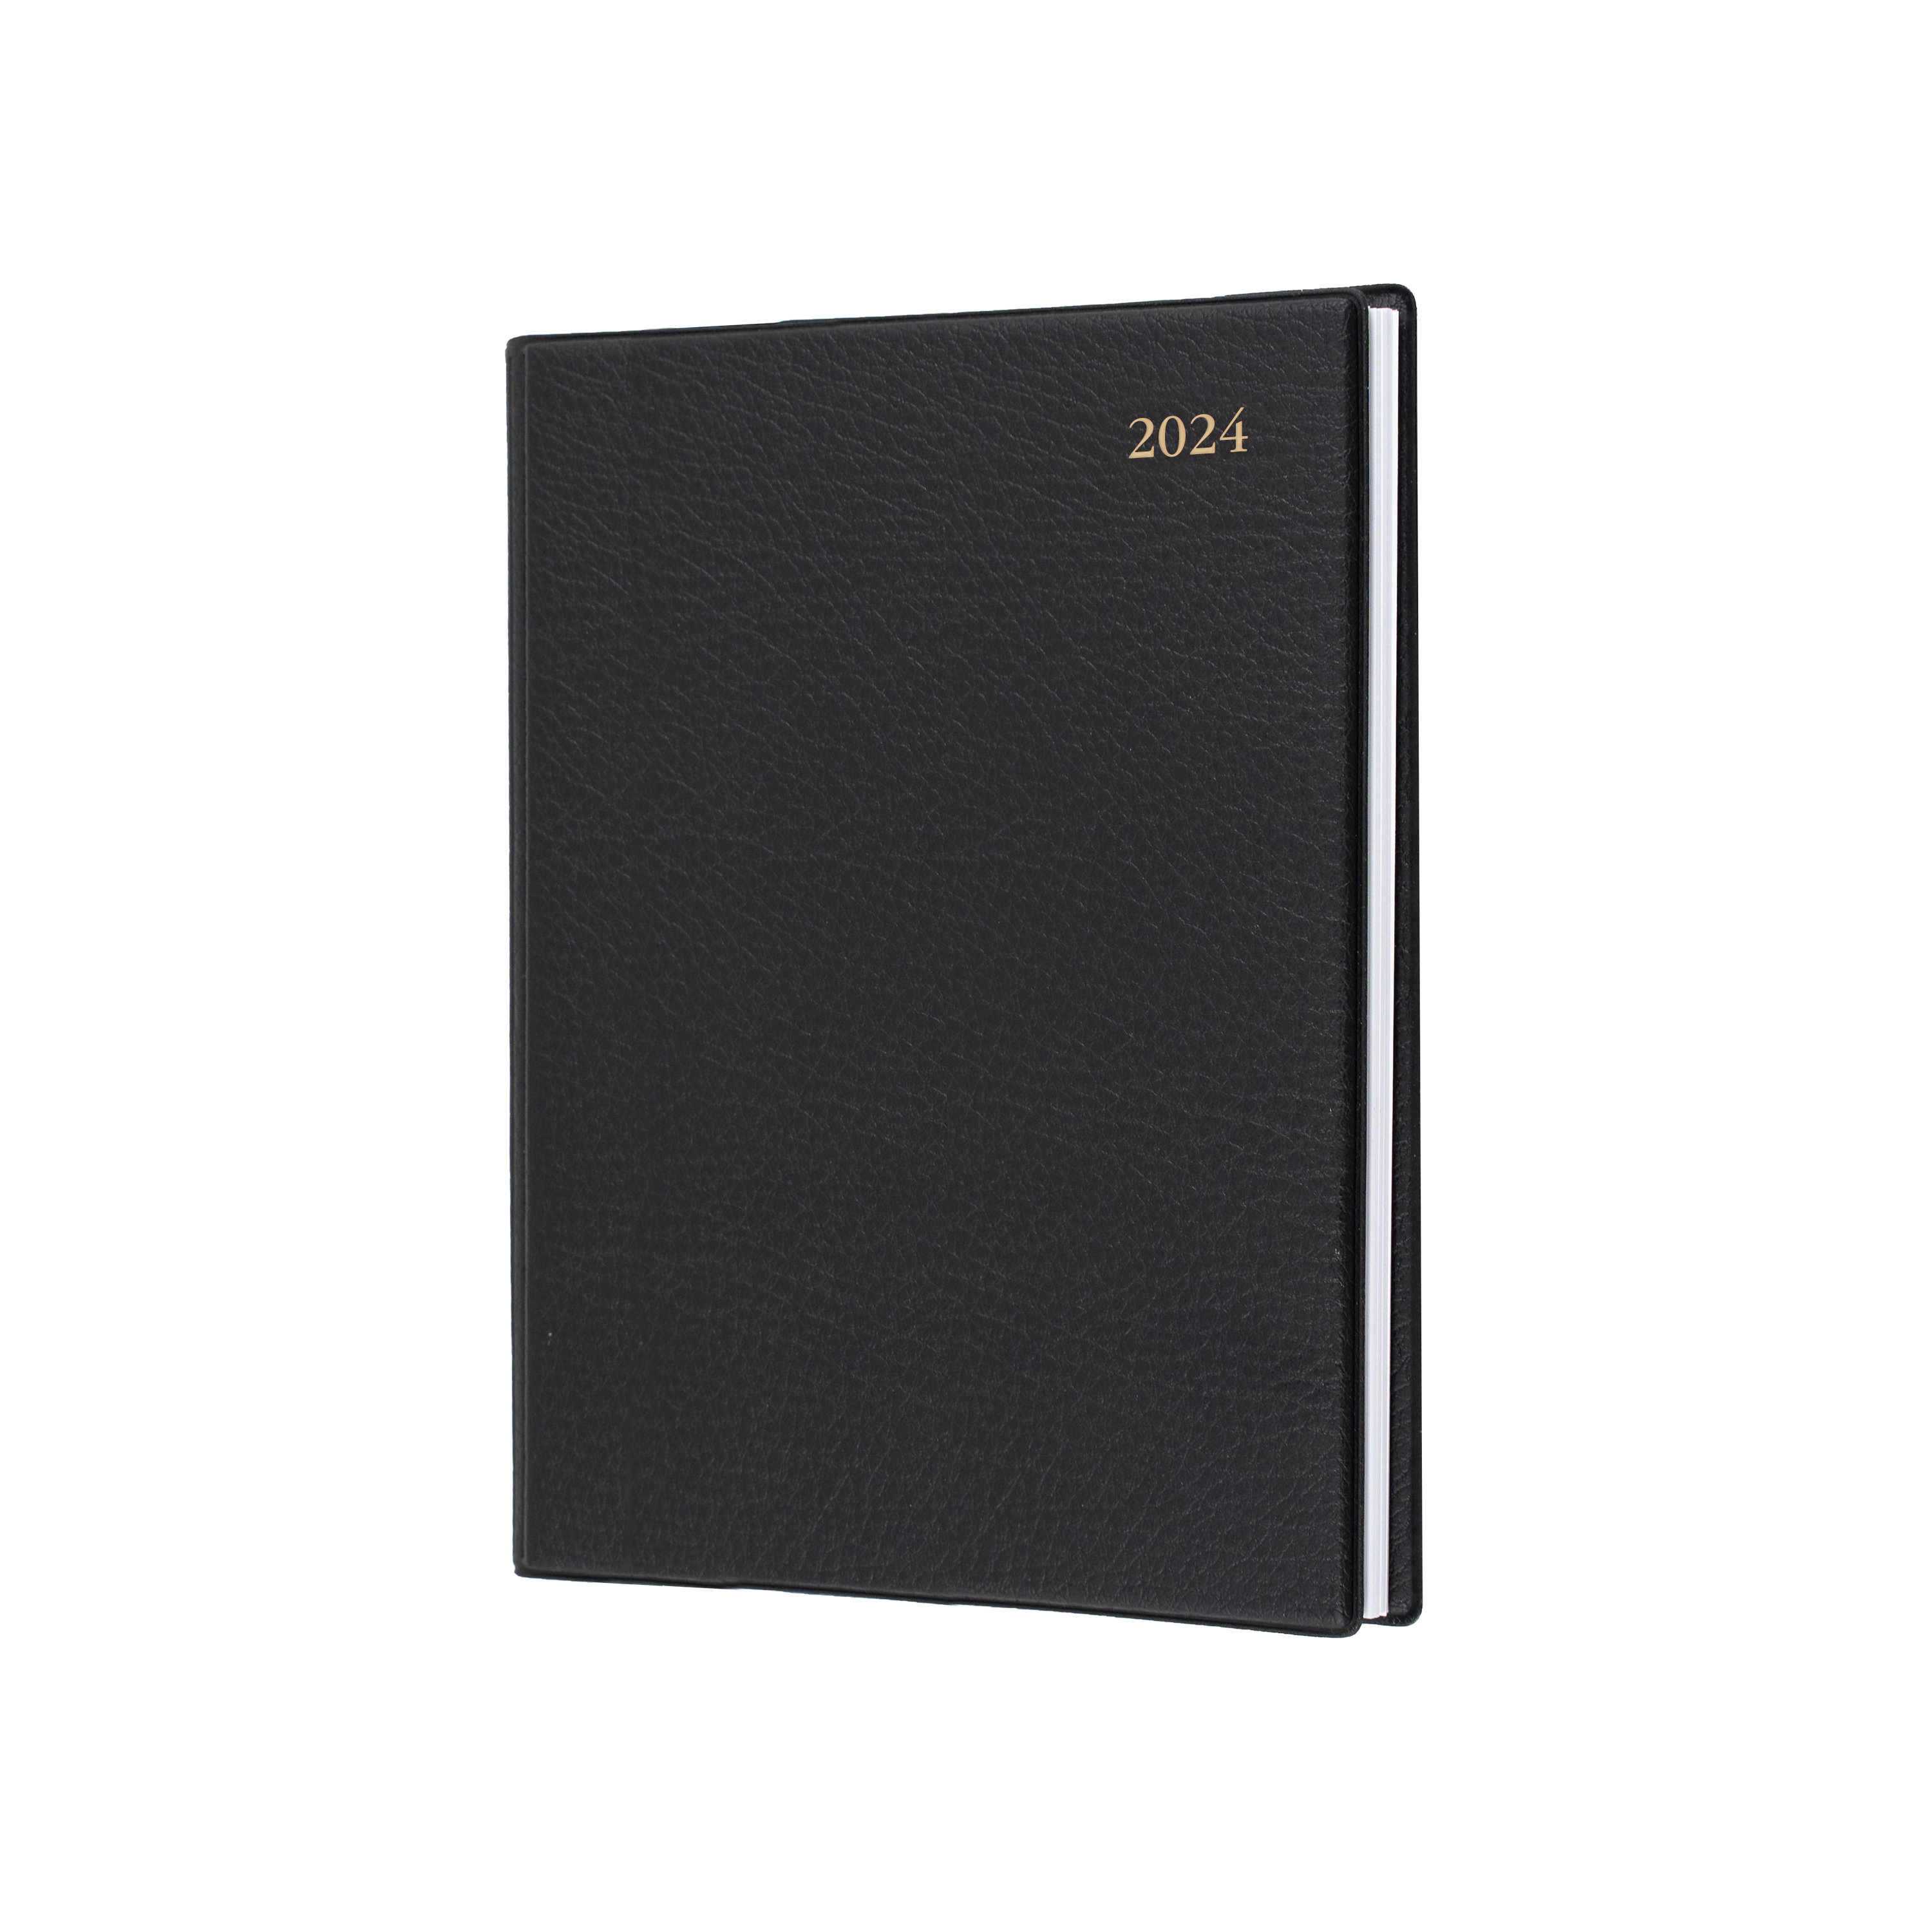 Associate 2024 Diary - Week to View, Size A5 Black / A5 (210 x 148mm)